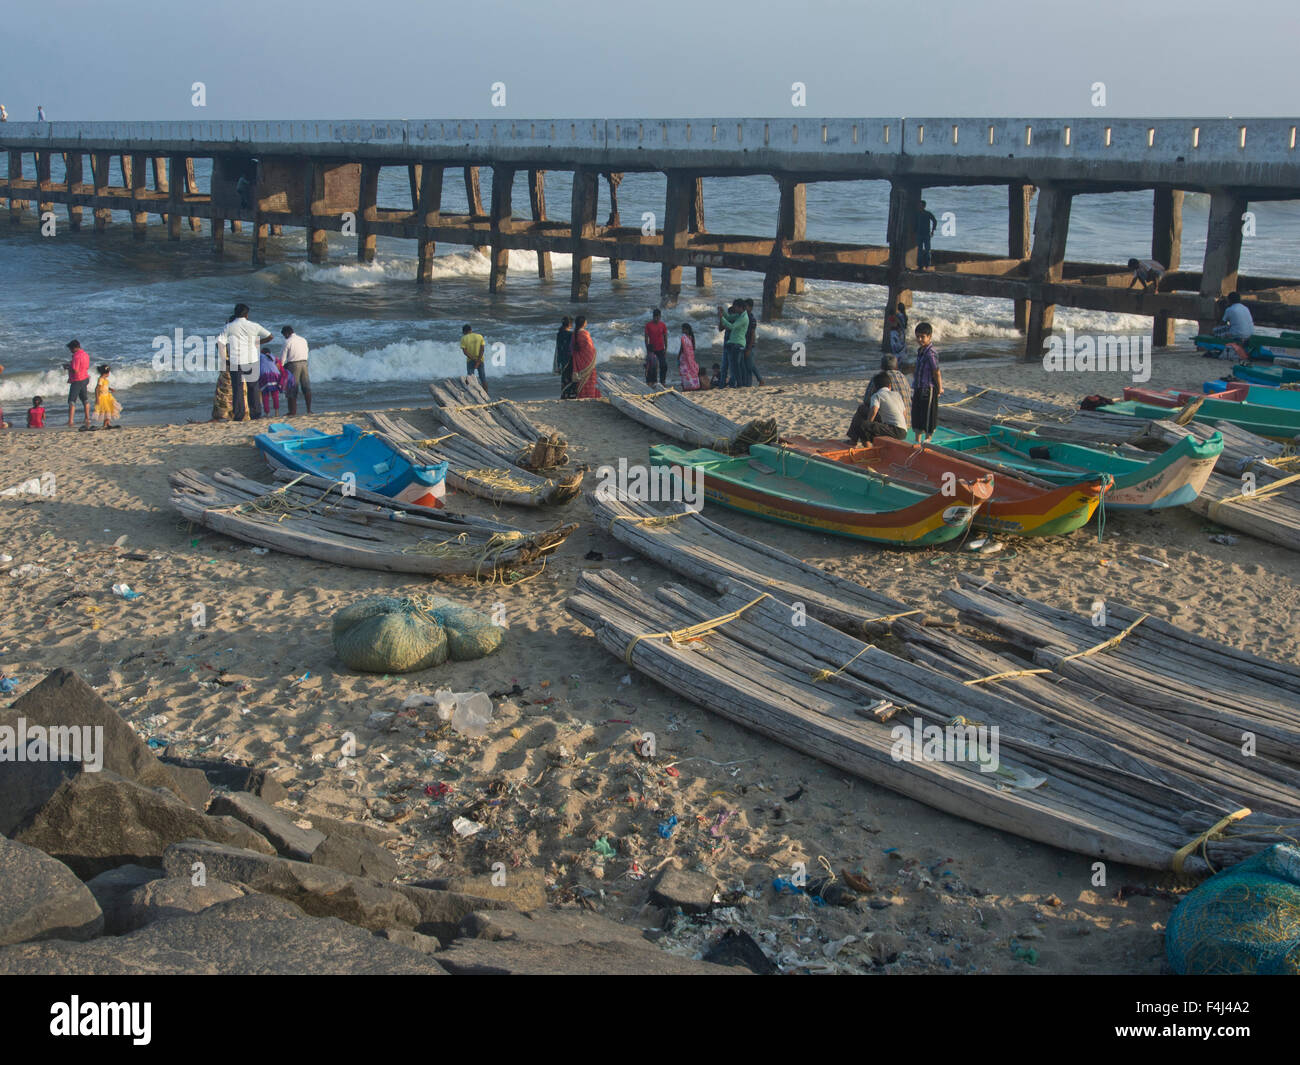 Fishing boats on the beach at the French union territory of Pondicherry, Tamil Nadu, India, Asia Stock Photo